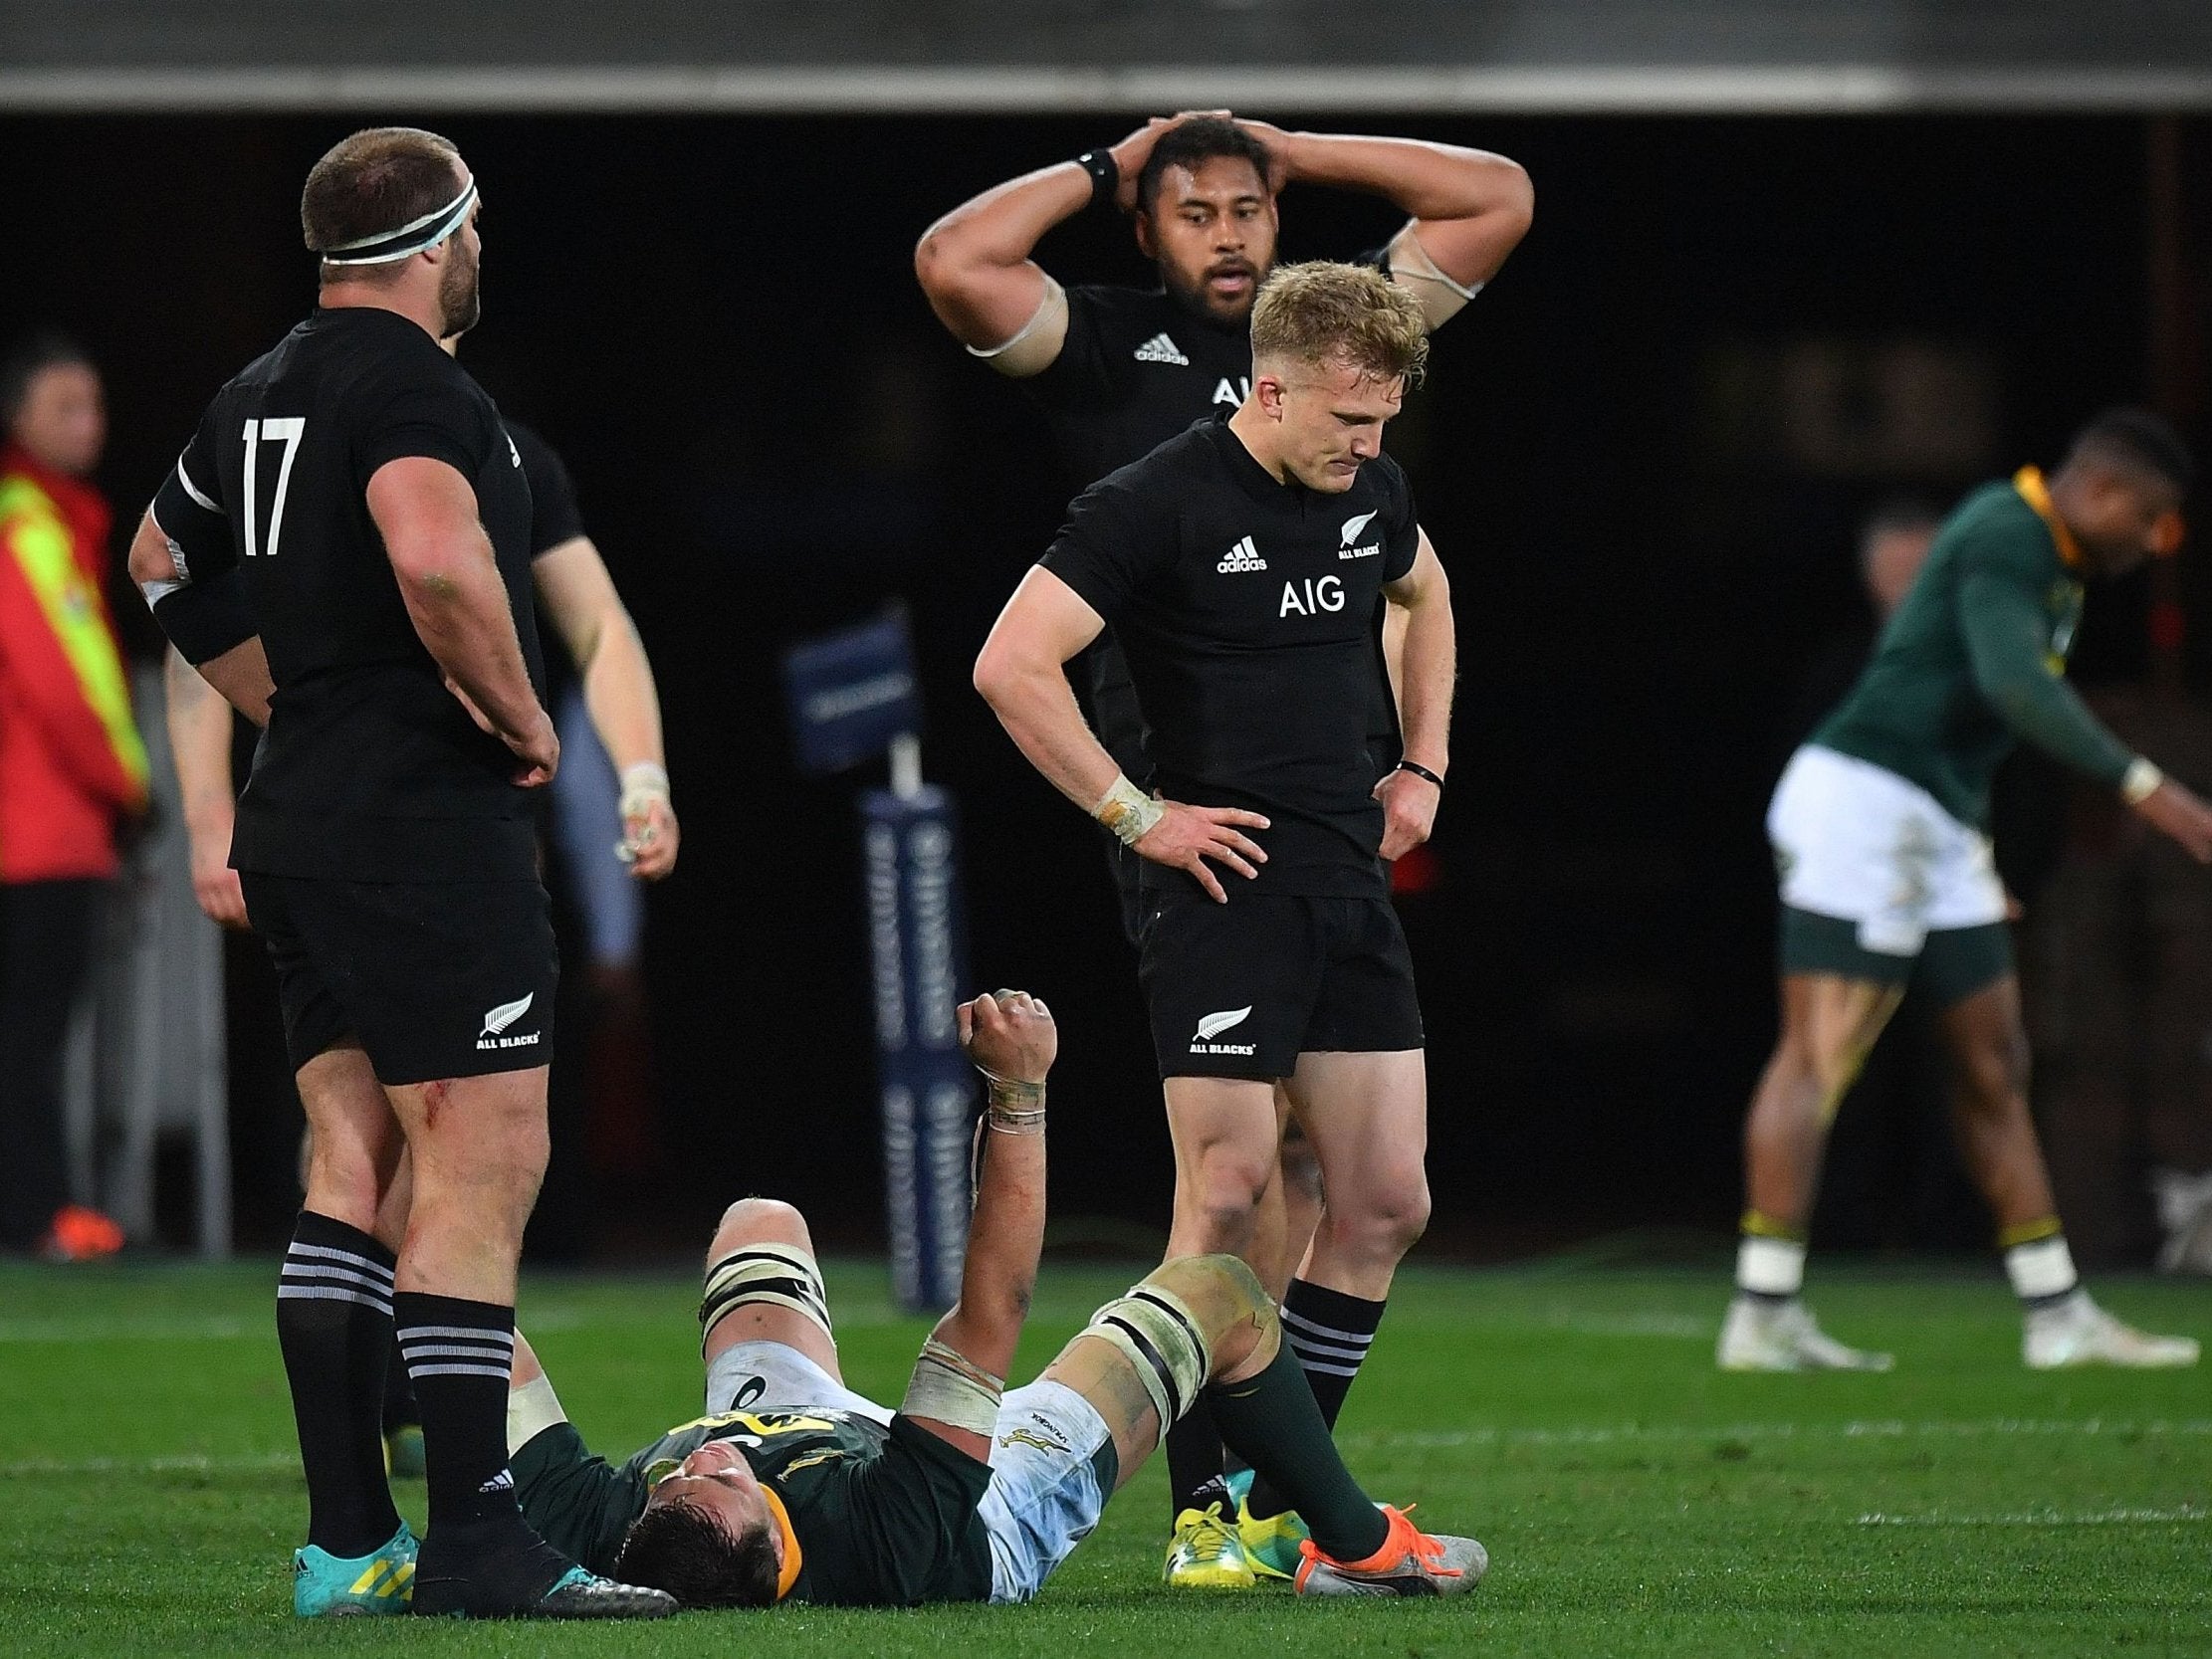 The All Blacks suffered their first defeat of the Rugby Championship